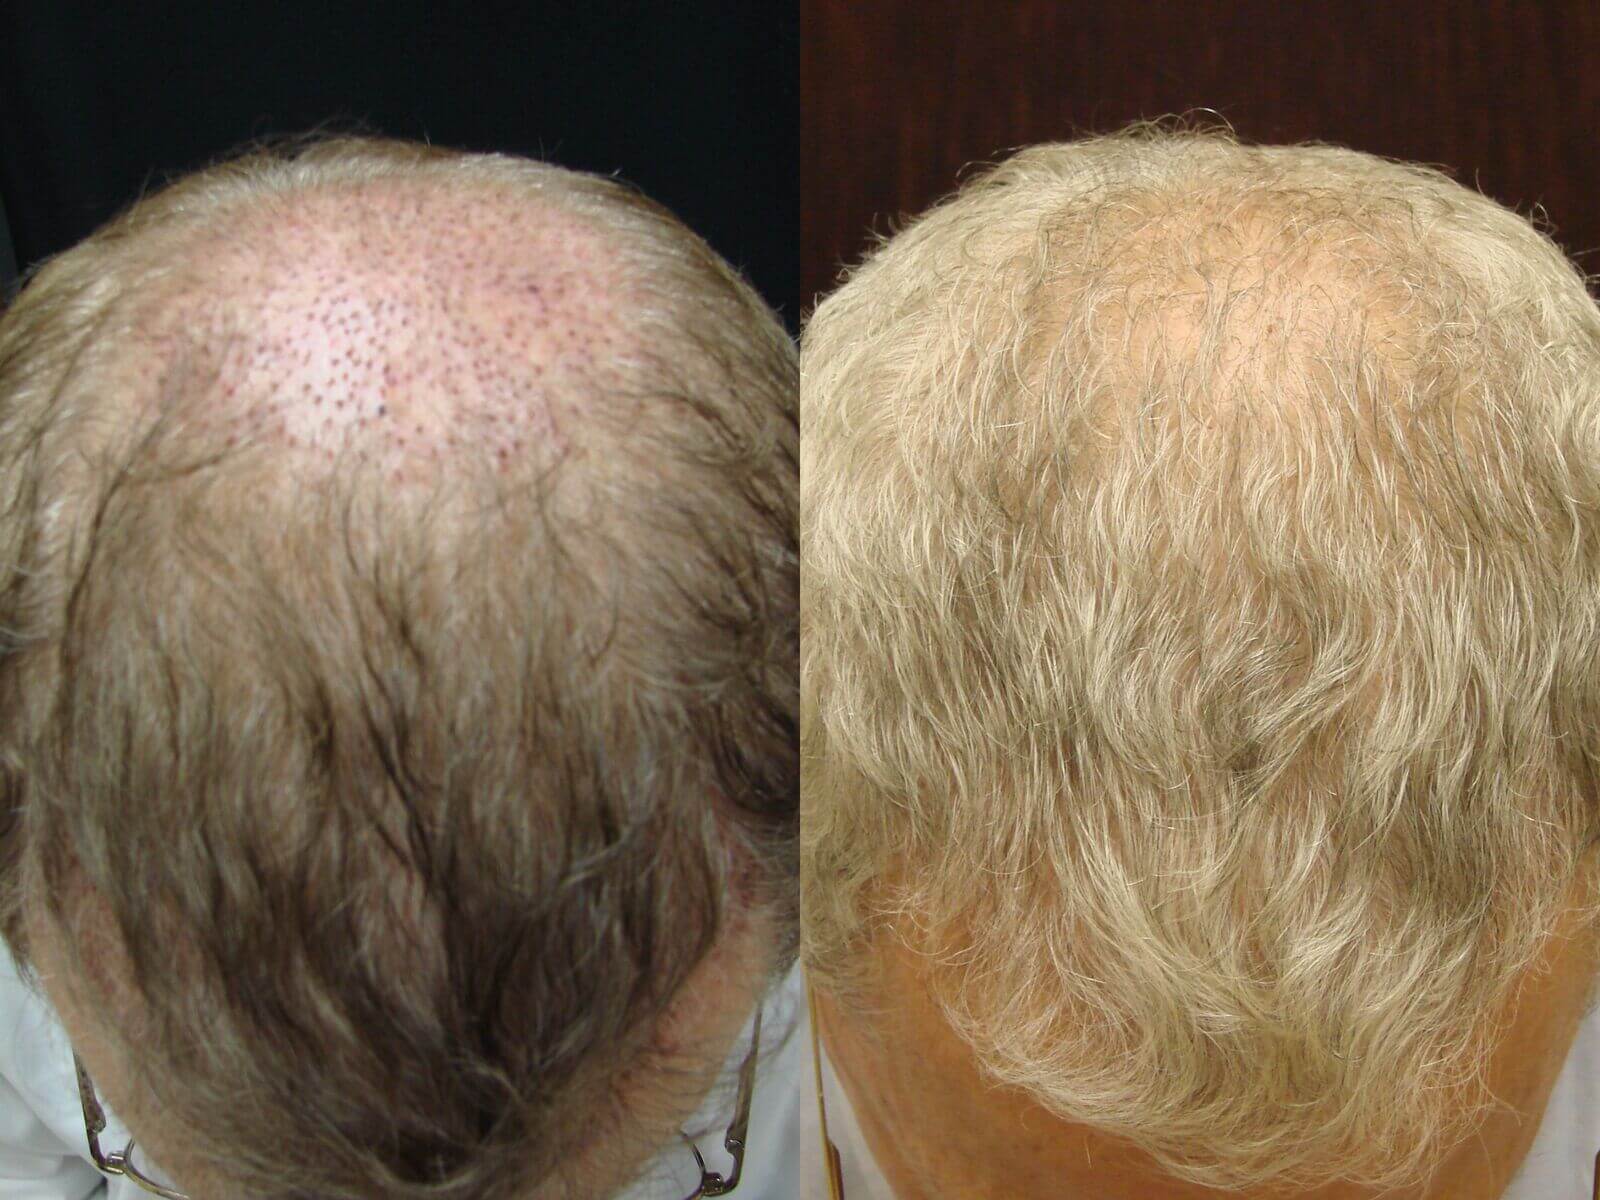 70 year old, 1,000 grafts, before and 8 months after